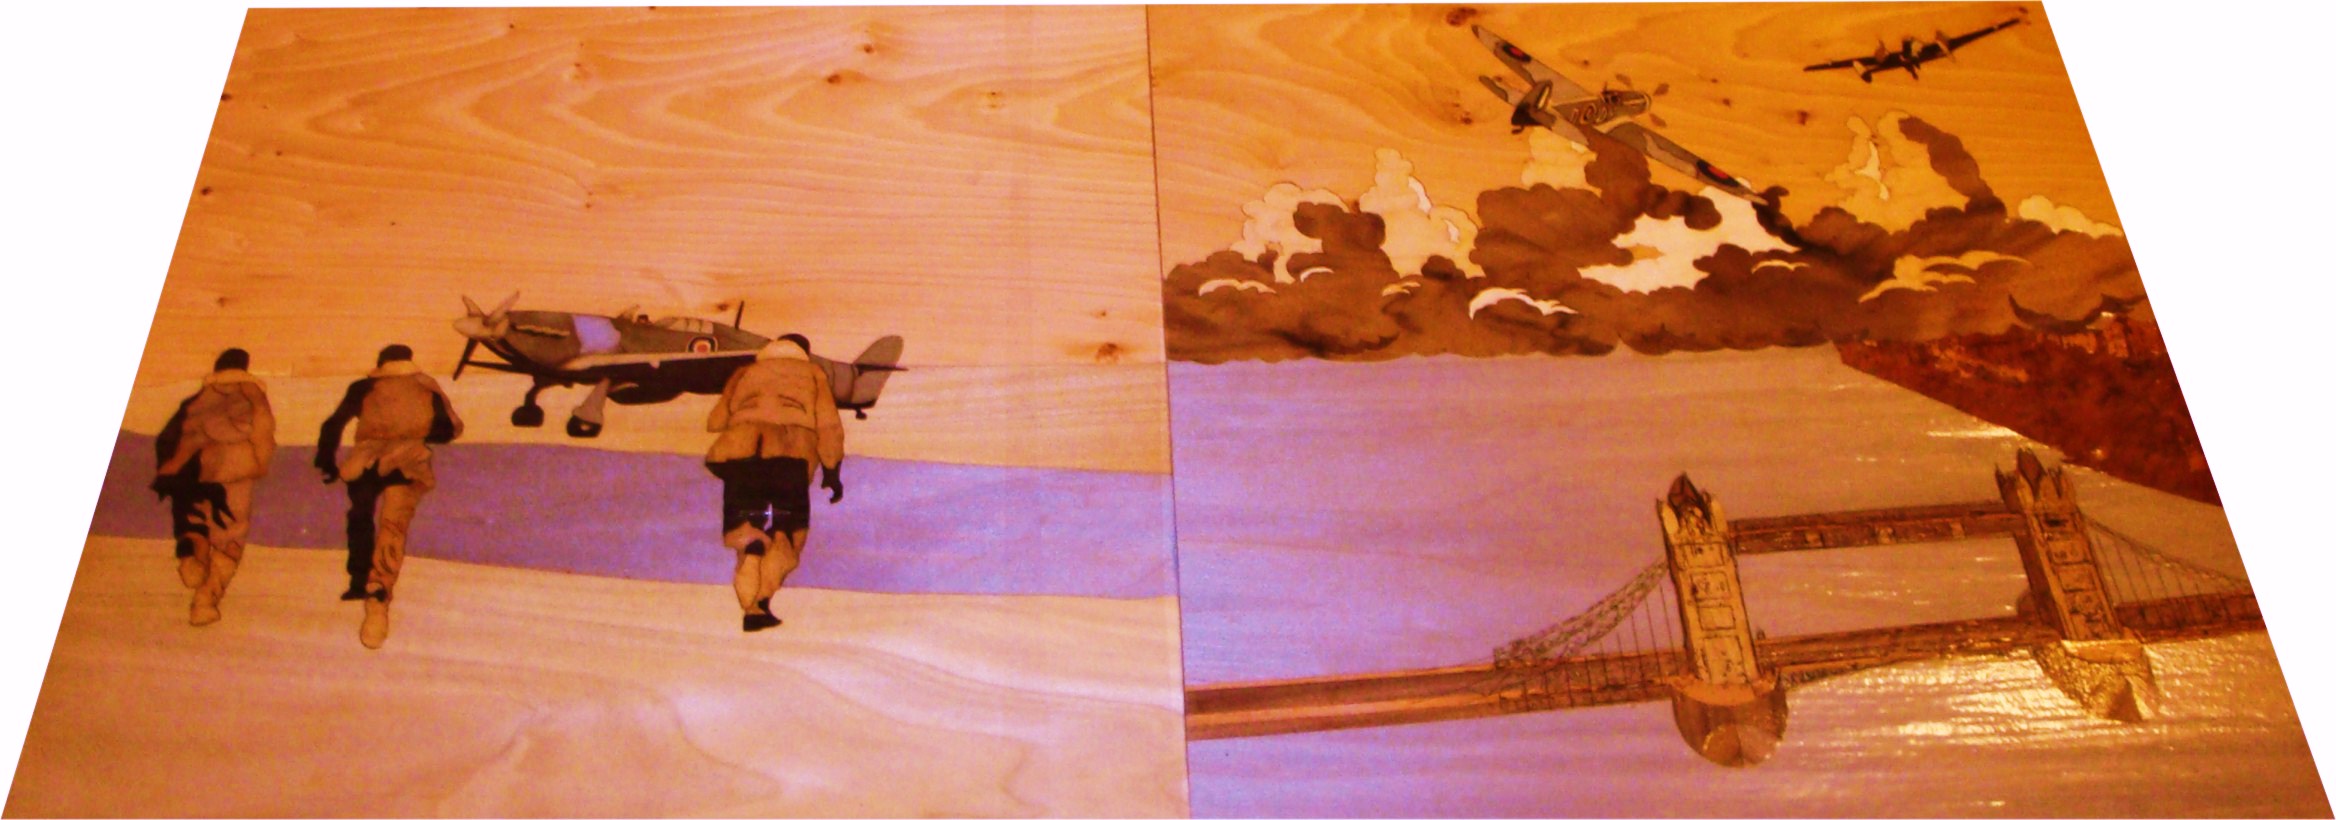 panels designed with a Battle of Britain theme June 2010 (unfinished panels)